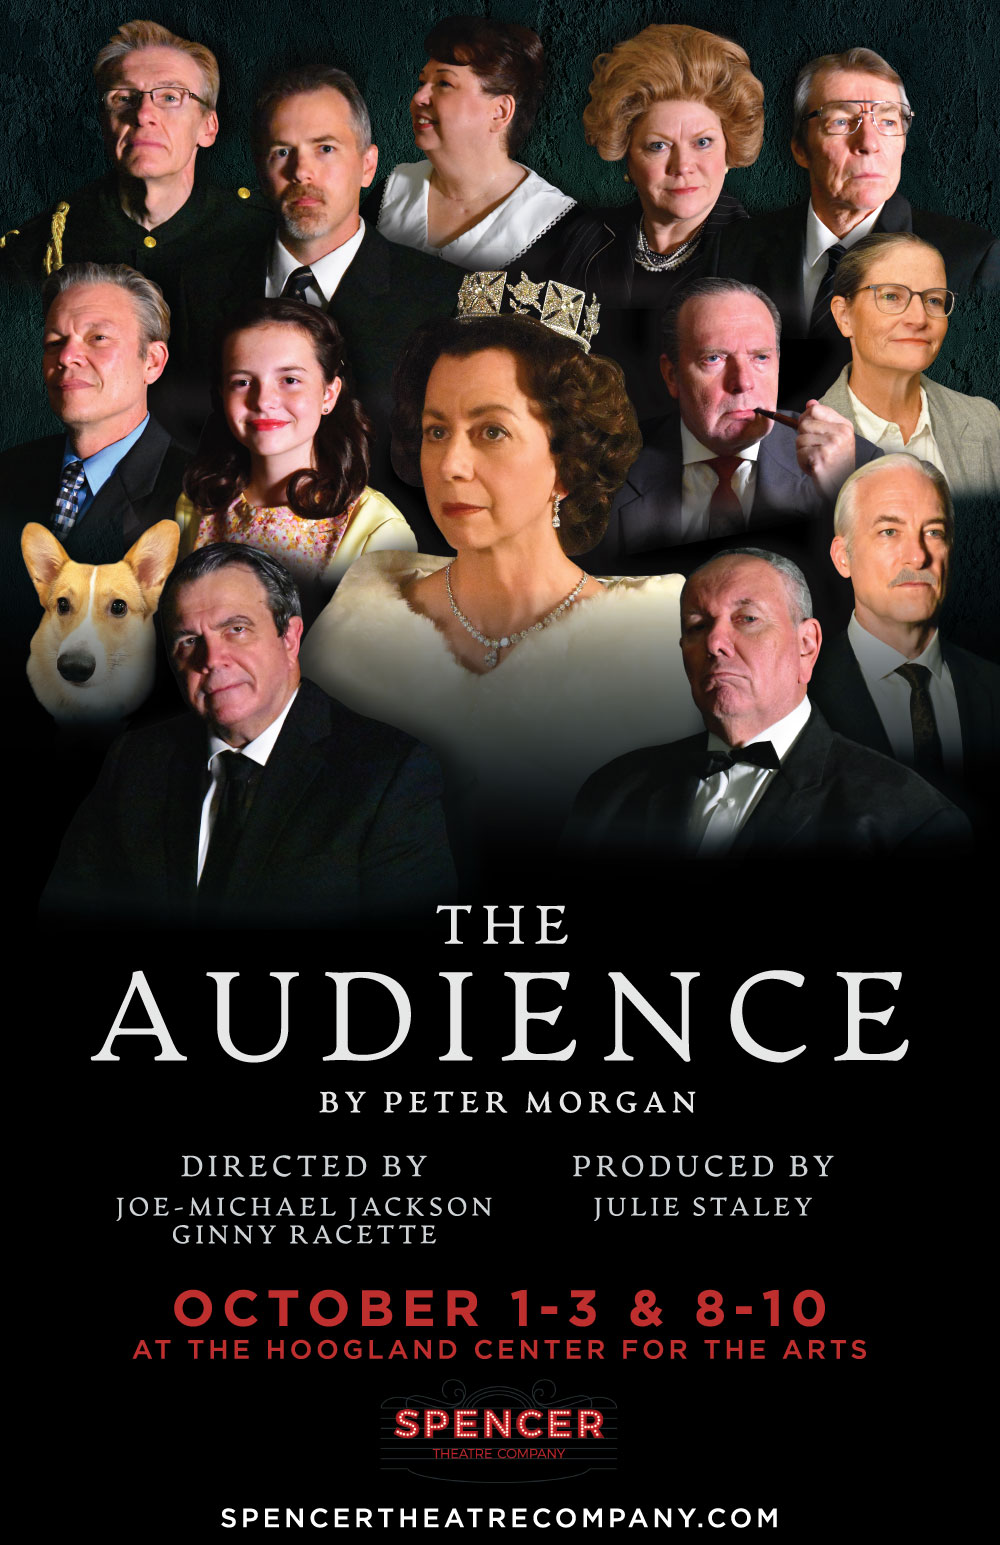 Spencer Theatre presents The Audience October 1-3 & 8-10